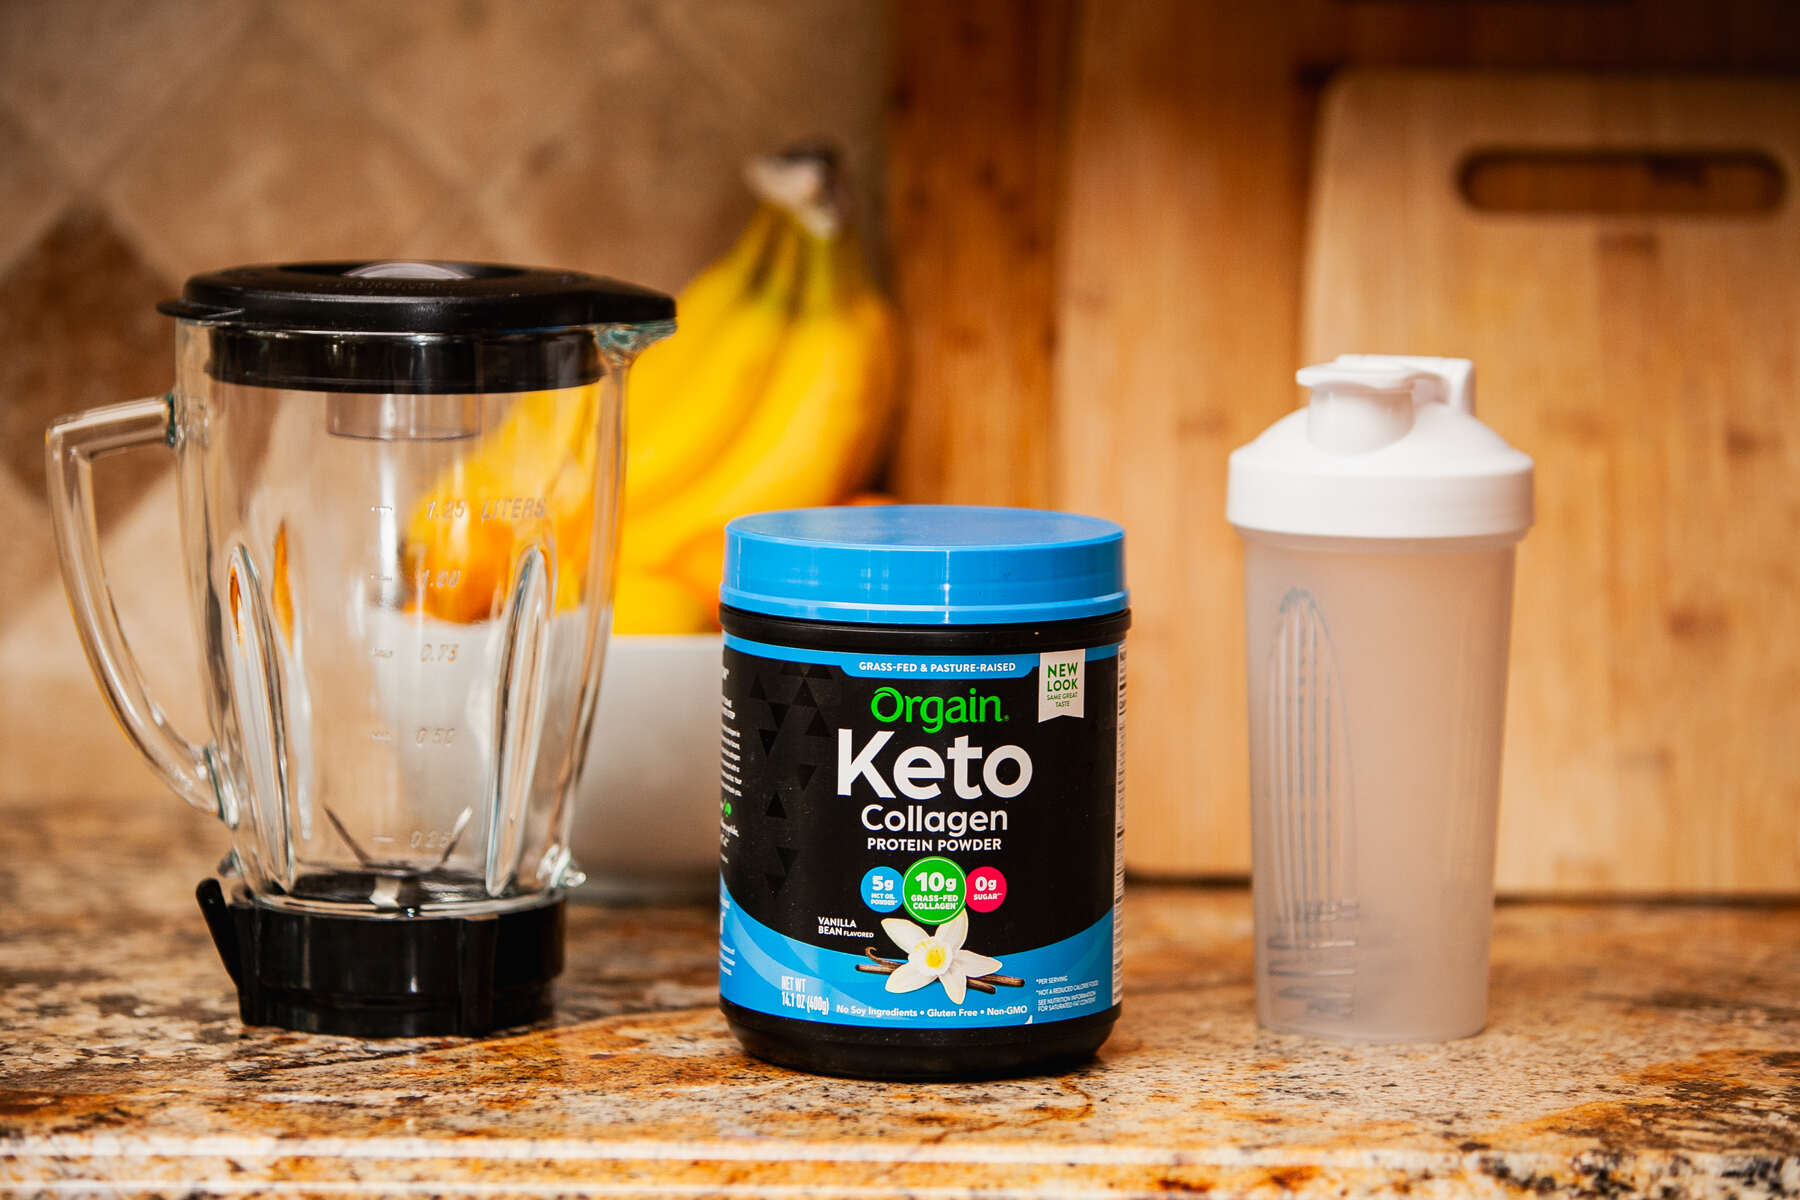 Kitchen counter with a blender, a container of Orgain Keto Collagen Protein Powder in vanilla flavor, and a white shake bottle